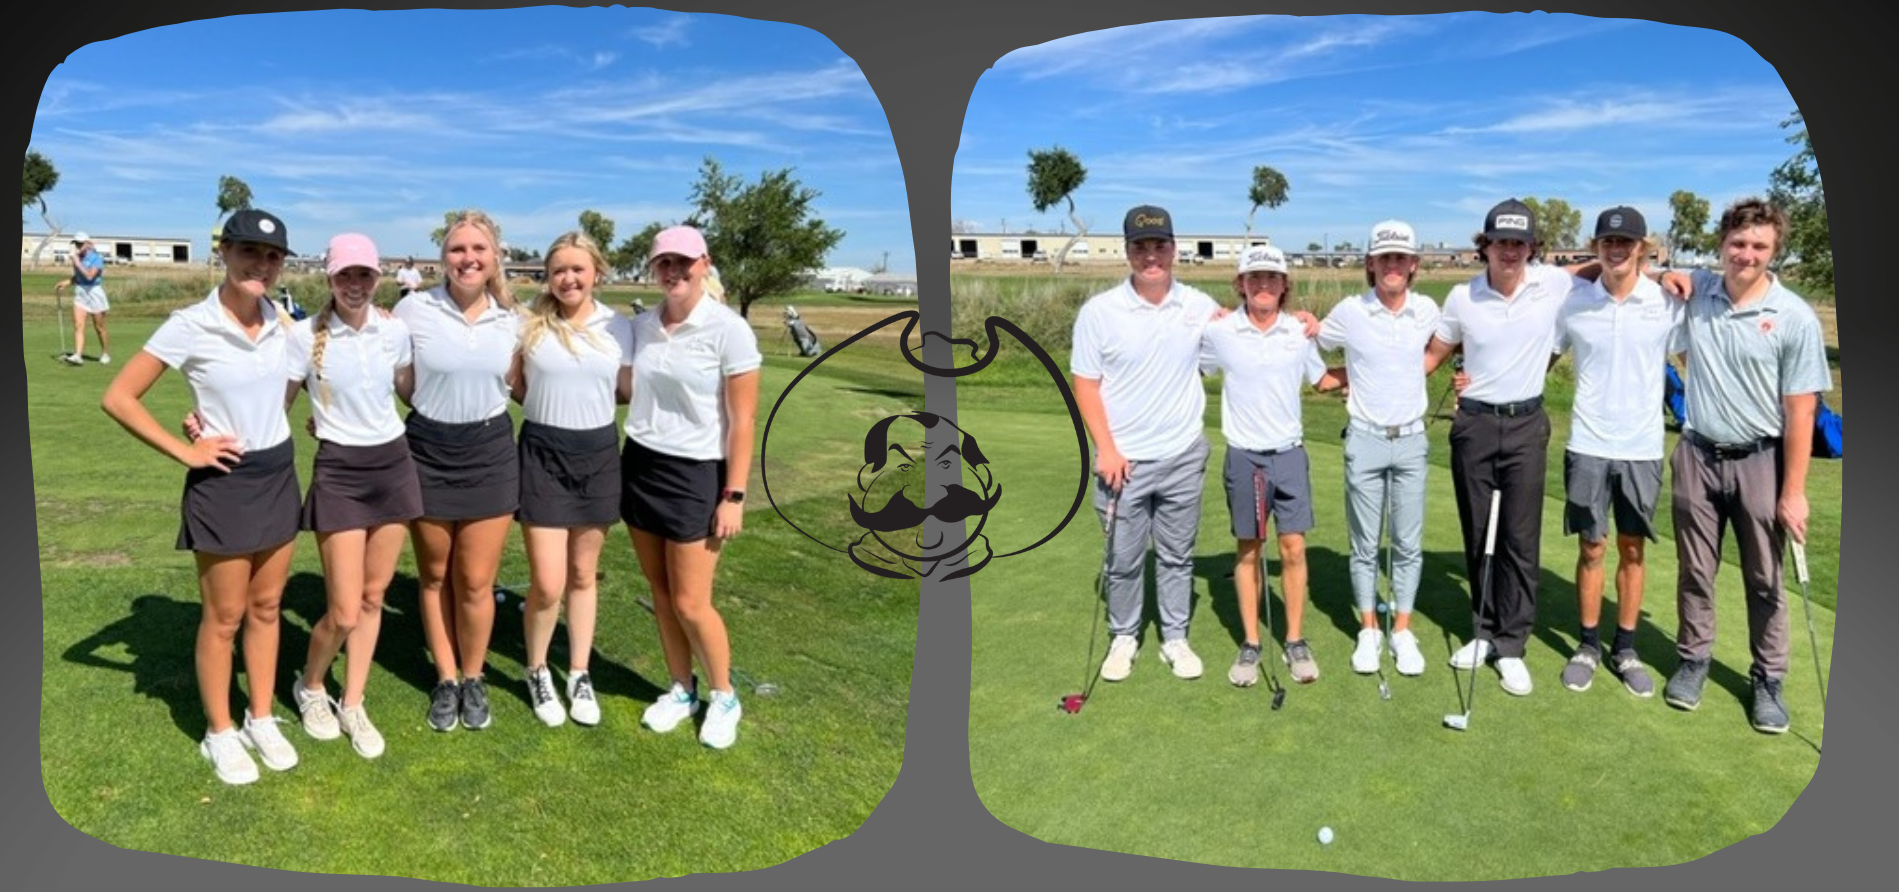 Rustlers place first in men's and women's tournaments at Otero